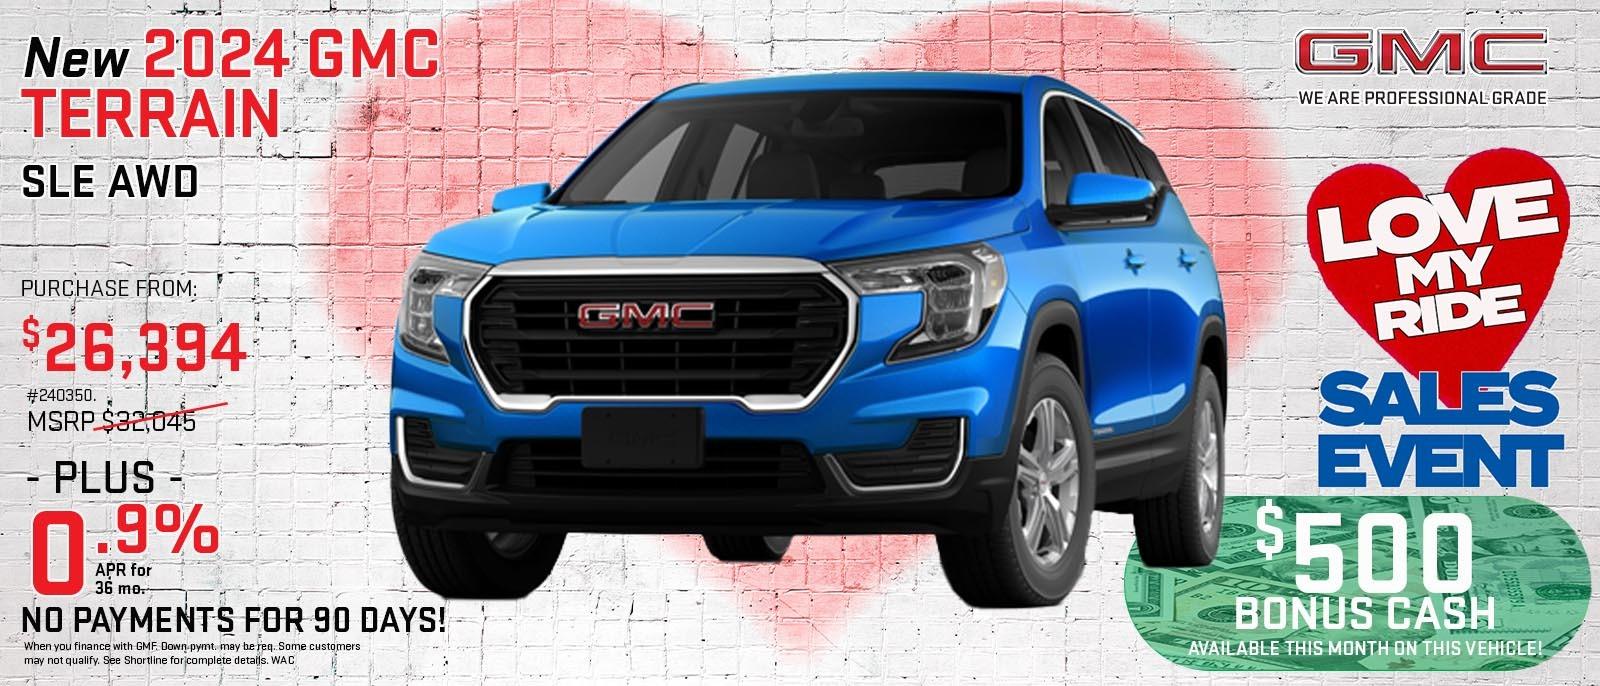 View the GMC Terrain Special in Denver at Shortline